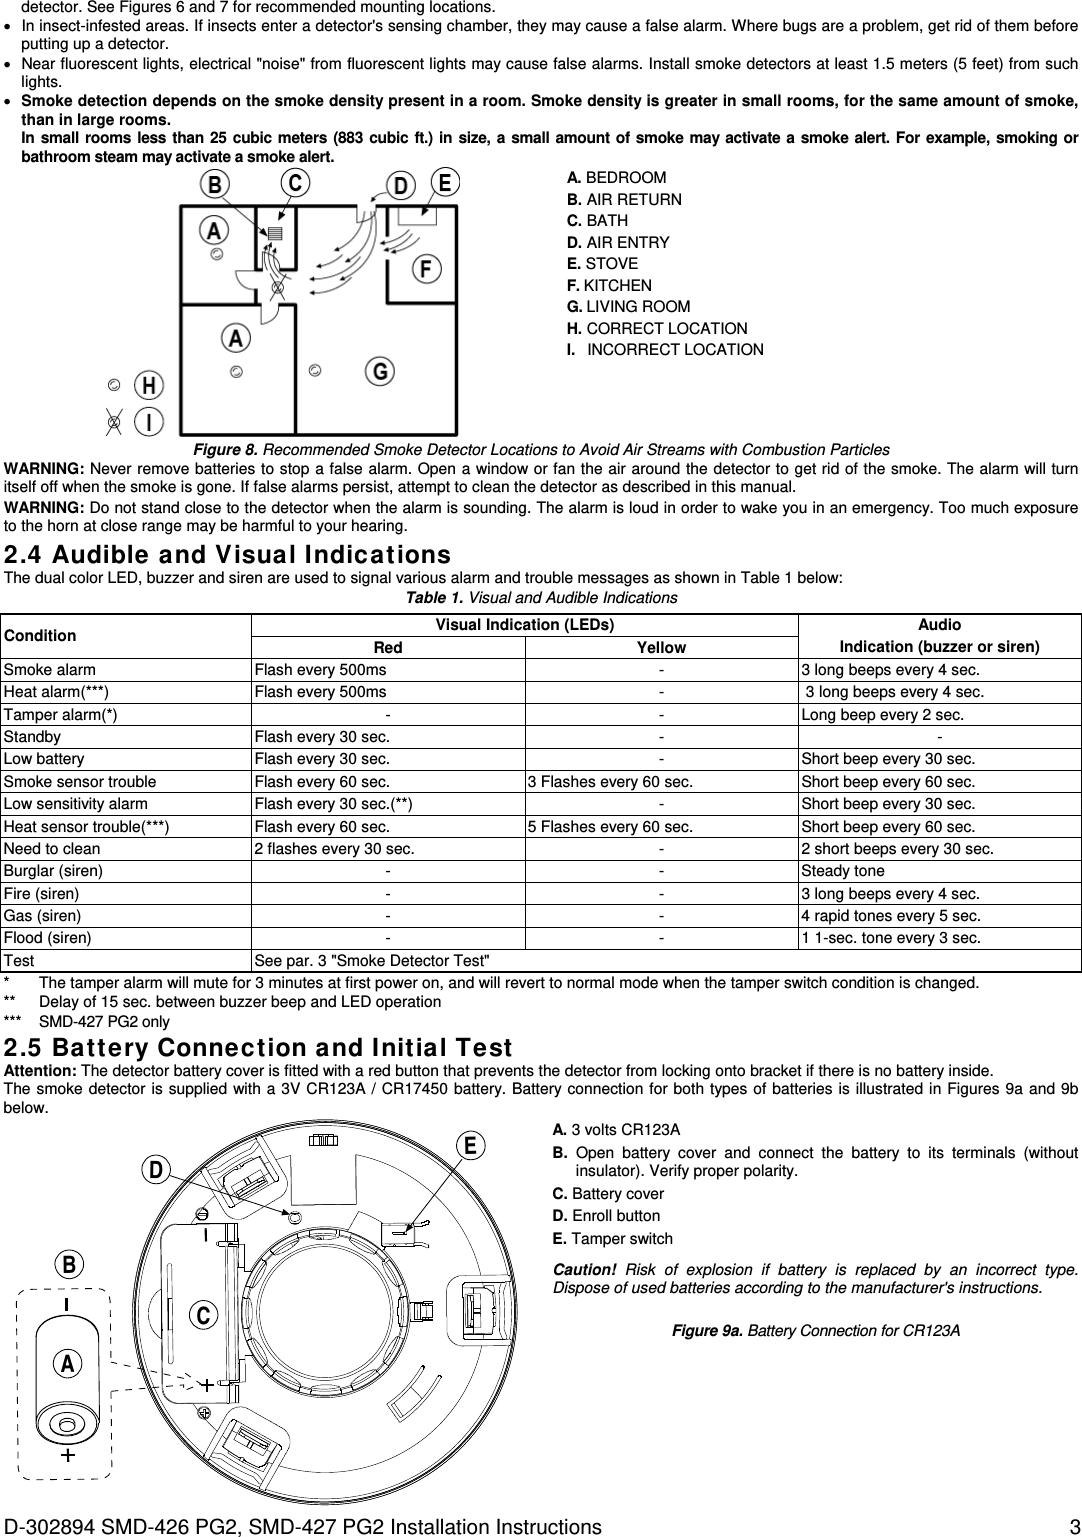  D-302894 SMD-426 PG2, SMD-427 PG2 Installation Instructions  3 detector. See Figures 6 and 7 for recommended mounting locations.   In insect-infested areas. If insects enter a detector&apos;s sensing chamber, they may cause a false alarm. Where bugs are a problem, get rid of them before putting up a detector.   Near fluorescent lights, electrical &quot;noise&quot; from fluorescent lights may cause false alarms. Install smoke detectors at least 1.5 meters (5 feet) from such lights.  Smoke detection depends on the smoke density present in a room. Smoke density is greater in small rooms, for the same amount of smoke, than in large rooms. In small rooms less than 25 cubic meters (883 cubic ft.) in size, a small amount of smoke may activate a smoke alert. For example, smoking or bathroom steam may activate a smoke alert. A. BEDROOM B. AIR RETURN C. BATH D. AIR ENTRY E. STOVE F. KITCHEN G. LIVING ROOM H. CORRECT LOCATION I. INCORRECT LOCATION Figure 8. Recommended Smoke Detector Locations to Avoid Air Streams with Combustion Particles WARNING: Never remove batteries to stop a false alarm. Open a window or fan the air around the detector to get rid of the smoke. The alarm will turn itself off when the smoke is gone. If false alarms persist, attempt to clean the detector as described in this manual.  WARNING: Do not stand close to the detector when the alarm is sounding. The alarm is loud in order to wake you in an emergency. Too much exposure to the horn at close range may be harmful to your hearing. 2.4 Audible and Visual Indica tions The dual color LED, buzzer and siren are used to signal various alarm and trouble messages as shown in Table 1 below: Table 1. Visual and Audible Indications Condition Visual Indication (LEDs) Audio Indication (buzzer or siren) Red YellowSmoke alarm Flash every 500ms  - 3 long beeps every 4 sec. Heat alarm(***) Flash every 500ms -  3 long beeps every 4 sec. Tamper alarm(*) - - Long beep every 2 sec. Standby  Flash every 30 sec. - - Low battery Flash every 30 sec. - Short beep every 30 sec. Smoke sensor trouble Flash every 60 sec. 3 Flashes every 60 sec. Short beep every 60 sec. Low sensitivity alarm Flash every 30 sec.(**) - Short beep every 30 sec. Heat sensor trouble(***) Flash every 60 sec. 5 Flashes every 60 sec. Short beep every 60 sec. Need to clean 2 flashes every 30 sec. - 2 short beeps every 30 sec. Burglar (siren) - - Steady tone Fire (siren) - - 3 long beeps every 4 sec. Gas (siren) - - 4 rapid tones every 5 sec. Flood (siren) - - 1 1-sec. tone every 3 sec. Test See par. 3 &quot;Smoke Detector Test&quot; *  The tamper alarm will mute for 3 minutes at first power on, and will revert to normal mode when the tamper switch condition is changed. **  Delay of 15 sec. between buzzer beep and LED operation ***   SMD-427 PG2 only 2.5 Bat tery Connect ion and Initial Test Attention: The detector battery cover is fitted with a red button that prevents the detector from locking onto bracket if there is no battery inside.  The smoke detector is supplied with a 3V CR123A / CR17450 battery. Battery connection for both types of batteries is illustrated in Figures 9a and 9b below. BCDAEA. 3 volts CR123A B. Open battery cover and connect the battery to its terminals (without insulator). Verify proper polarity. C. Battery cover D. Enroll button E. Tamper switch Caution! Risk of explosion if battery is replaced by an incorrect type. Dispose of used batteries according to the manufacturer&apos;s instructions. Figure 9a. Battery Connection for CR123A  